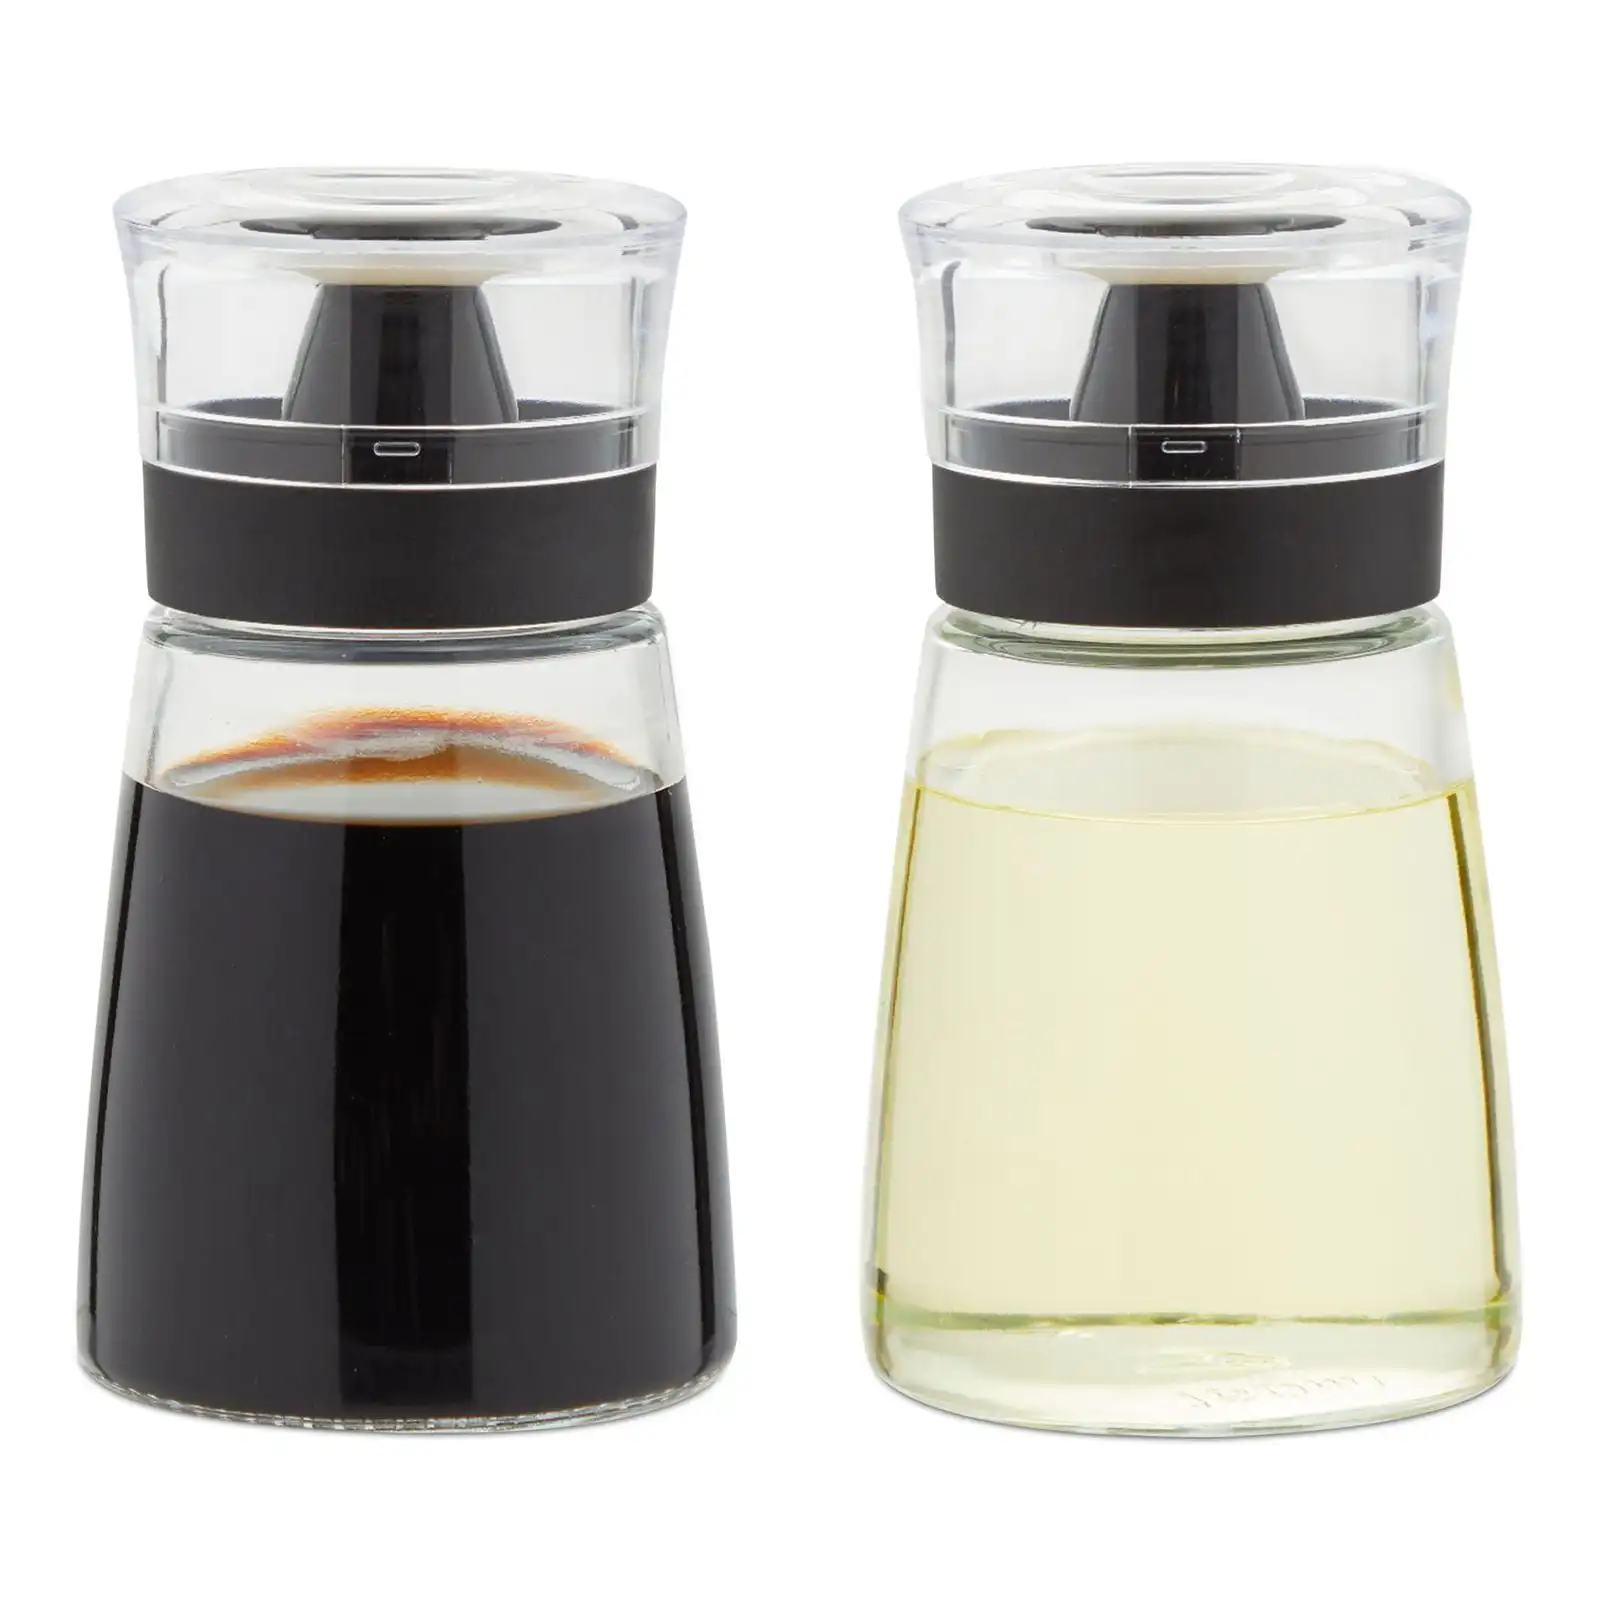 

2 Piece Small Oil and Vinegar Dispenser Set, Glass Cruet Bottles with No Drip for Salad Dressing, Balsamic, Soy Sauce, 5.5 oz